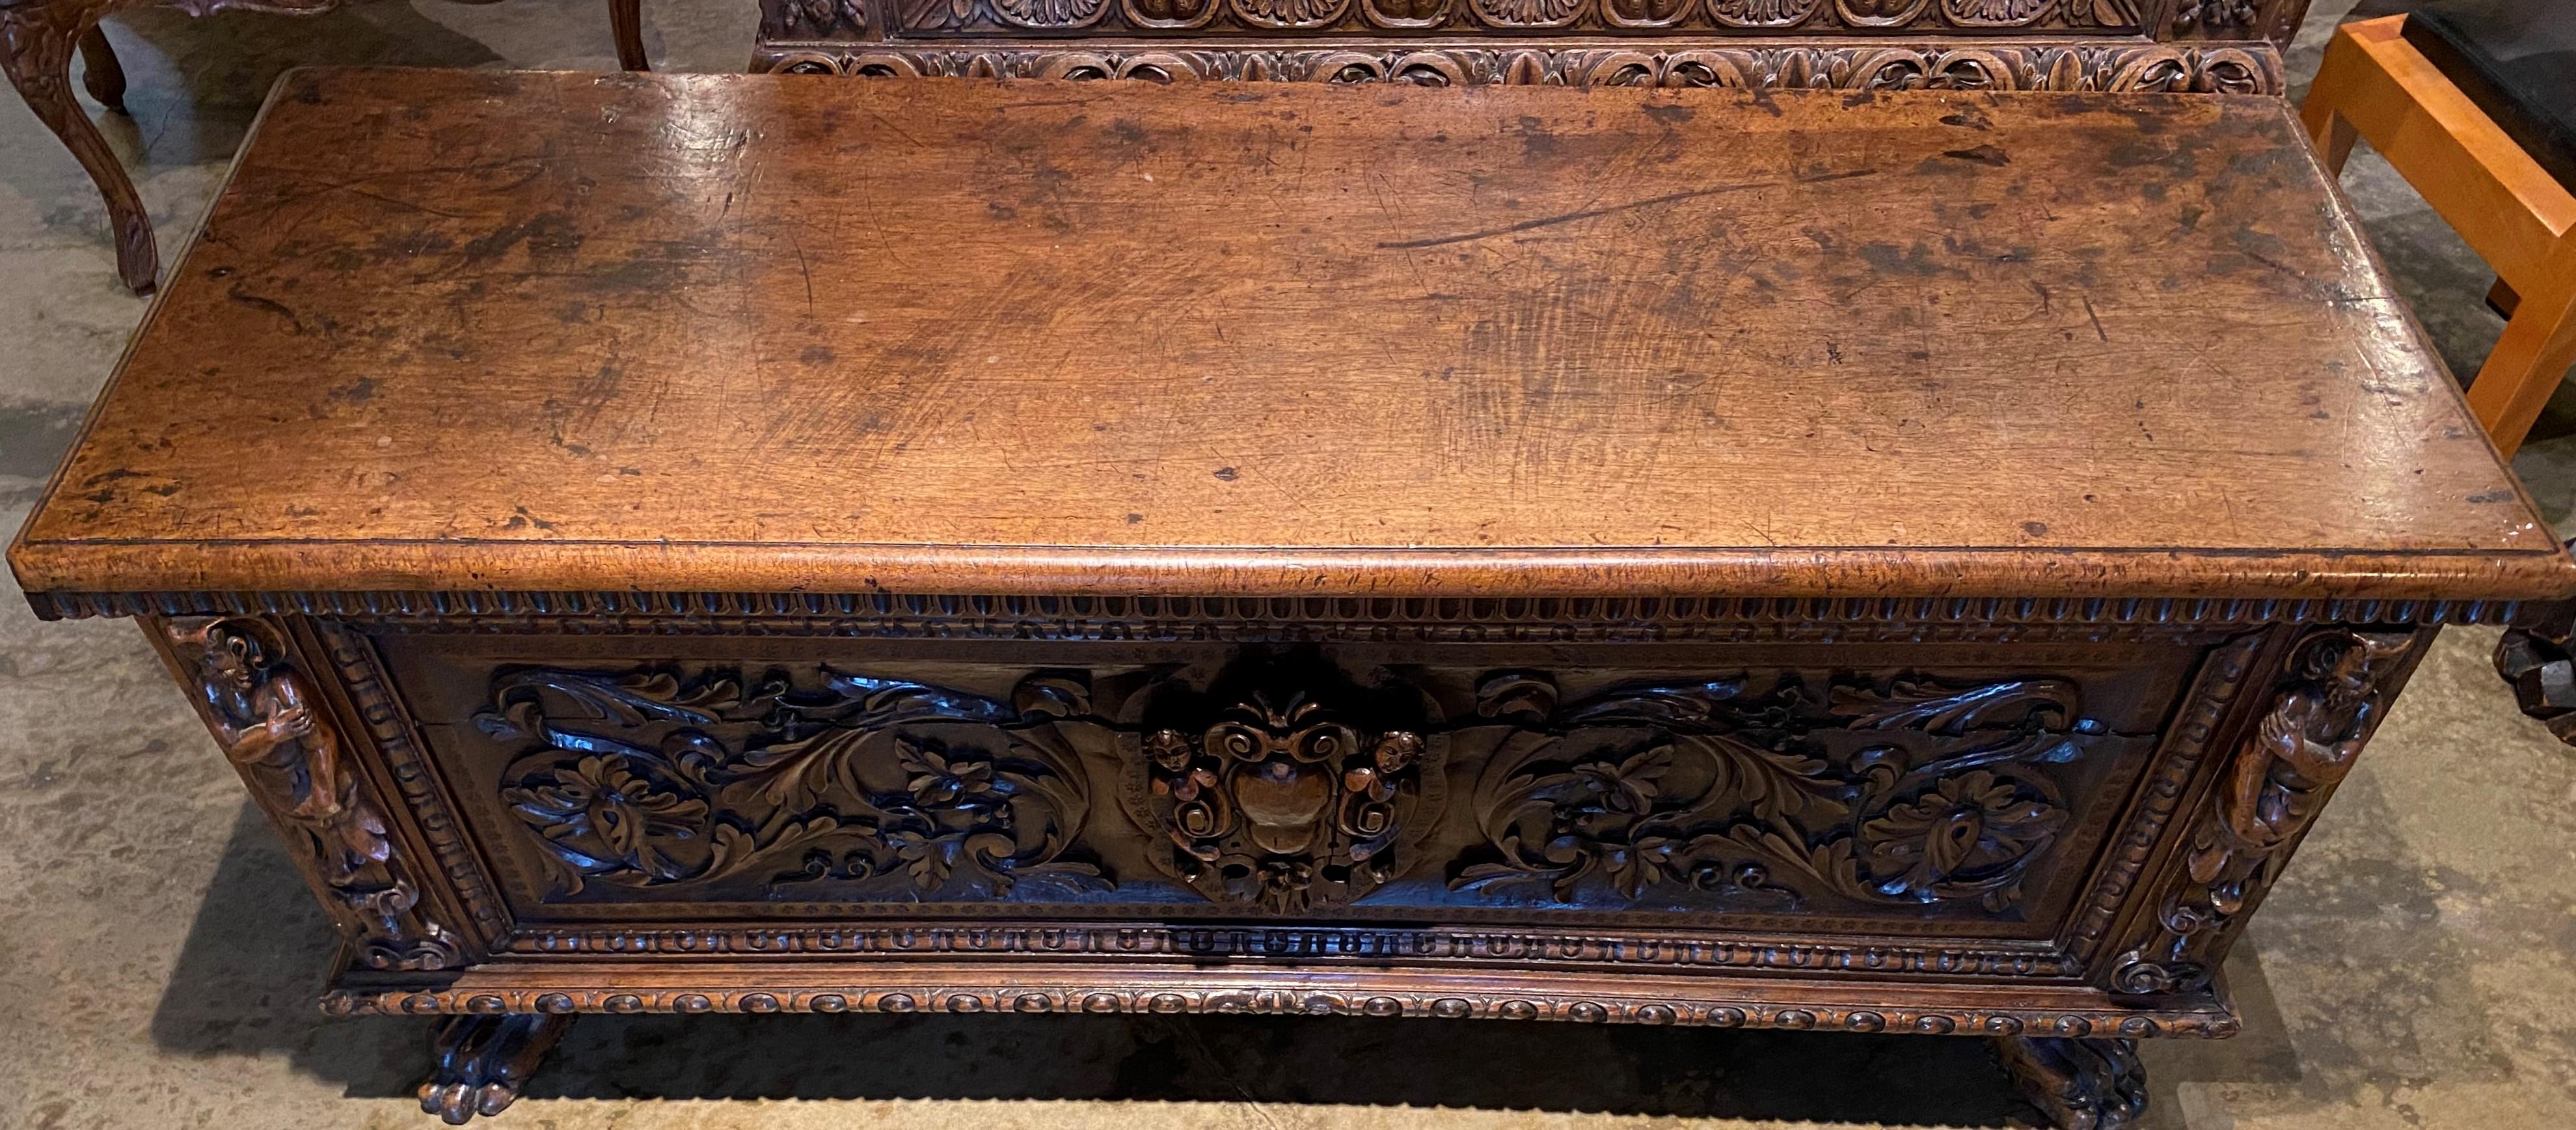 A finely carved Baroque style oak cassone with corner full figures, center cartouche with additional relief carved figures flanked by scrolled foliate relief carving, gadrooned edges on hinged top and case, original iron strap hinges and hardware,